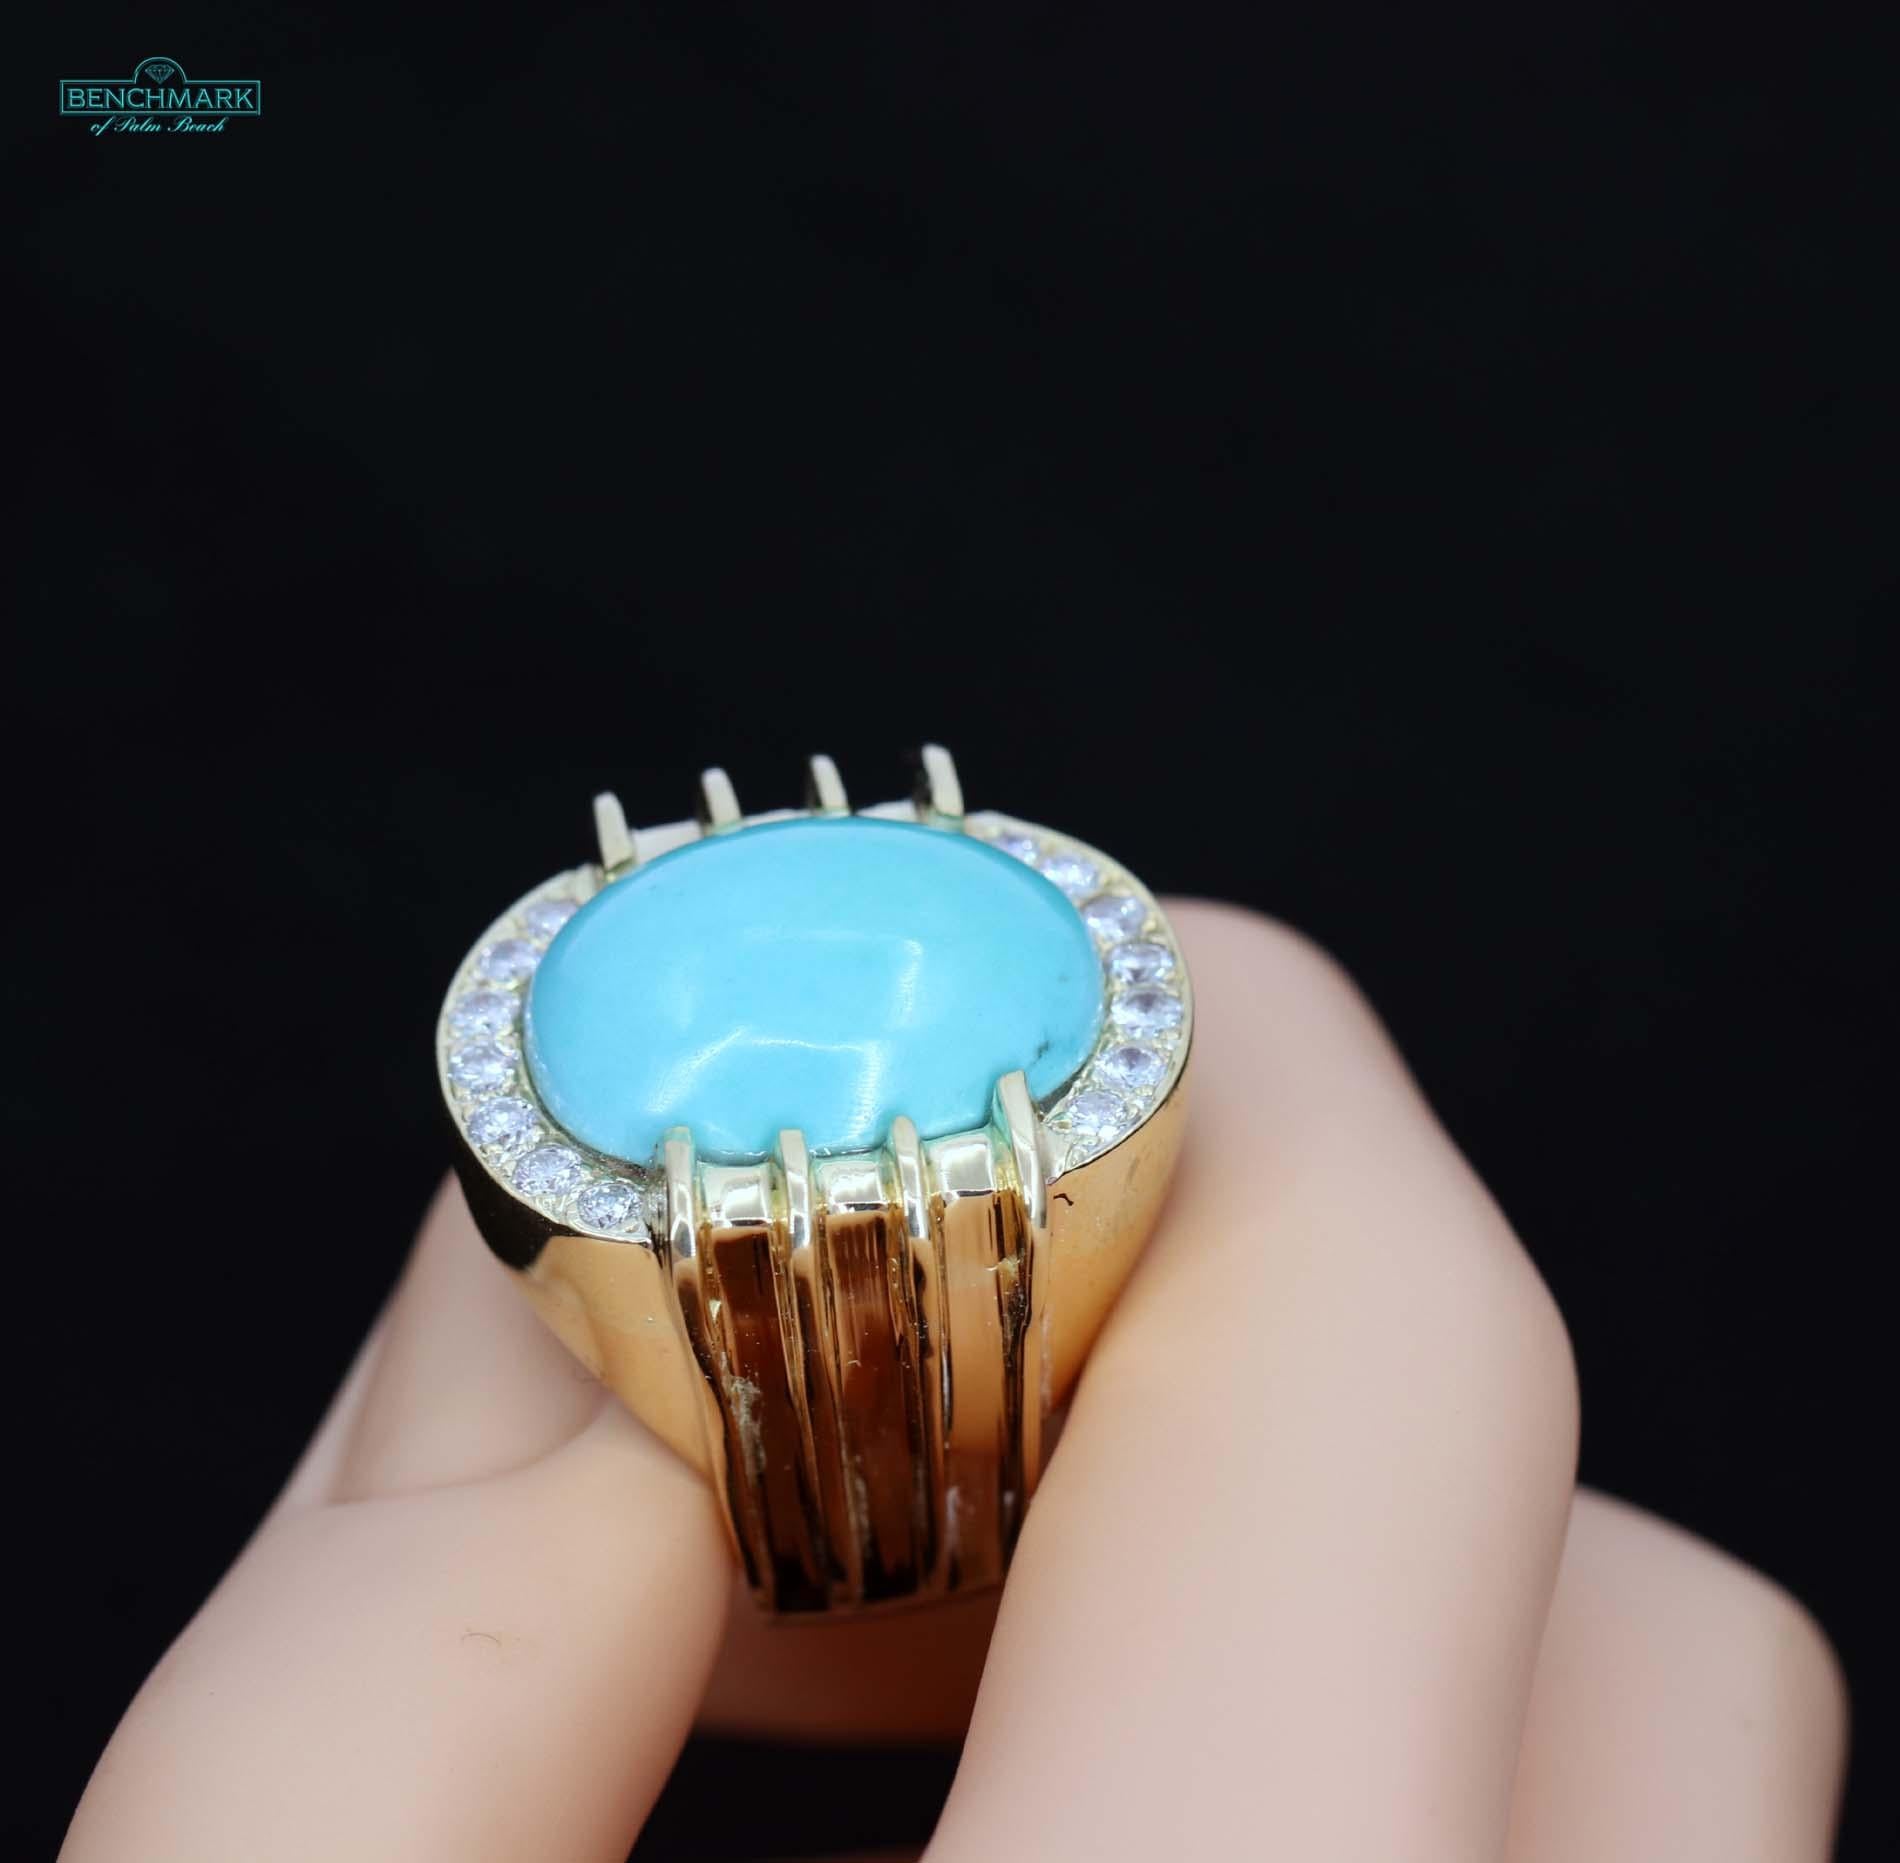 Women's Classic Styled Gold Ring with Turquoise and Diamonds